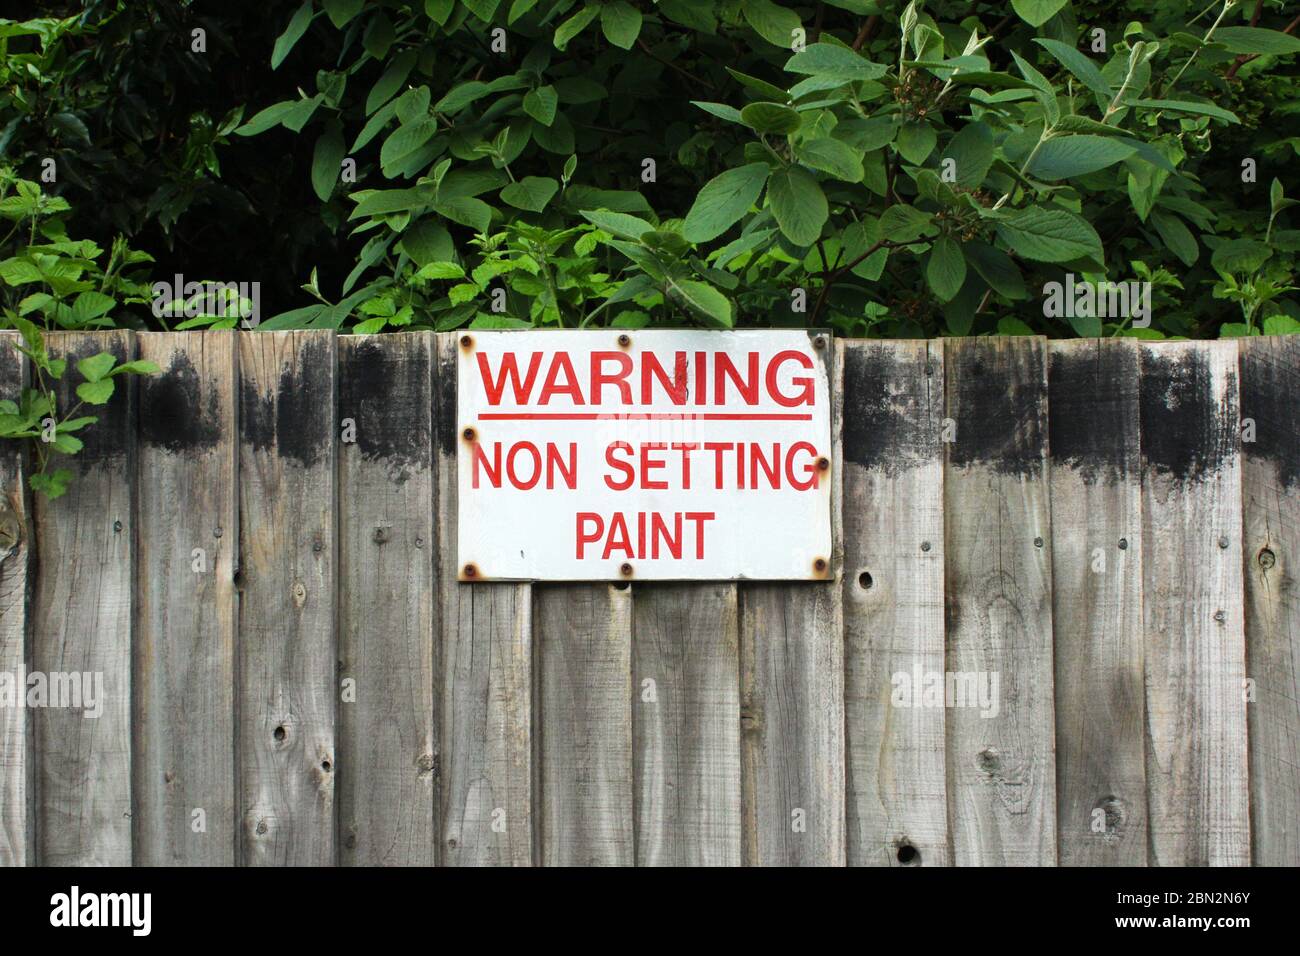 A 'Warning, non setting paint' sign on an outdoor fence in Manchester, England Stock Photo